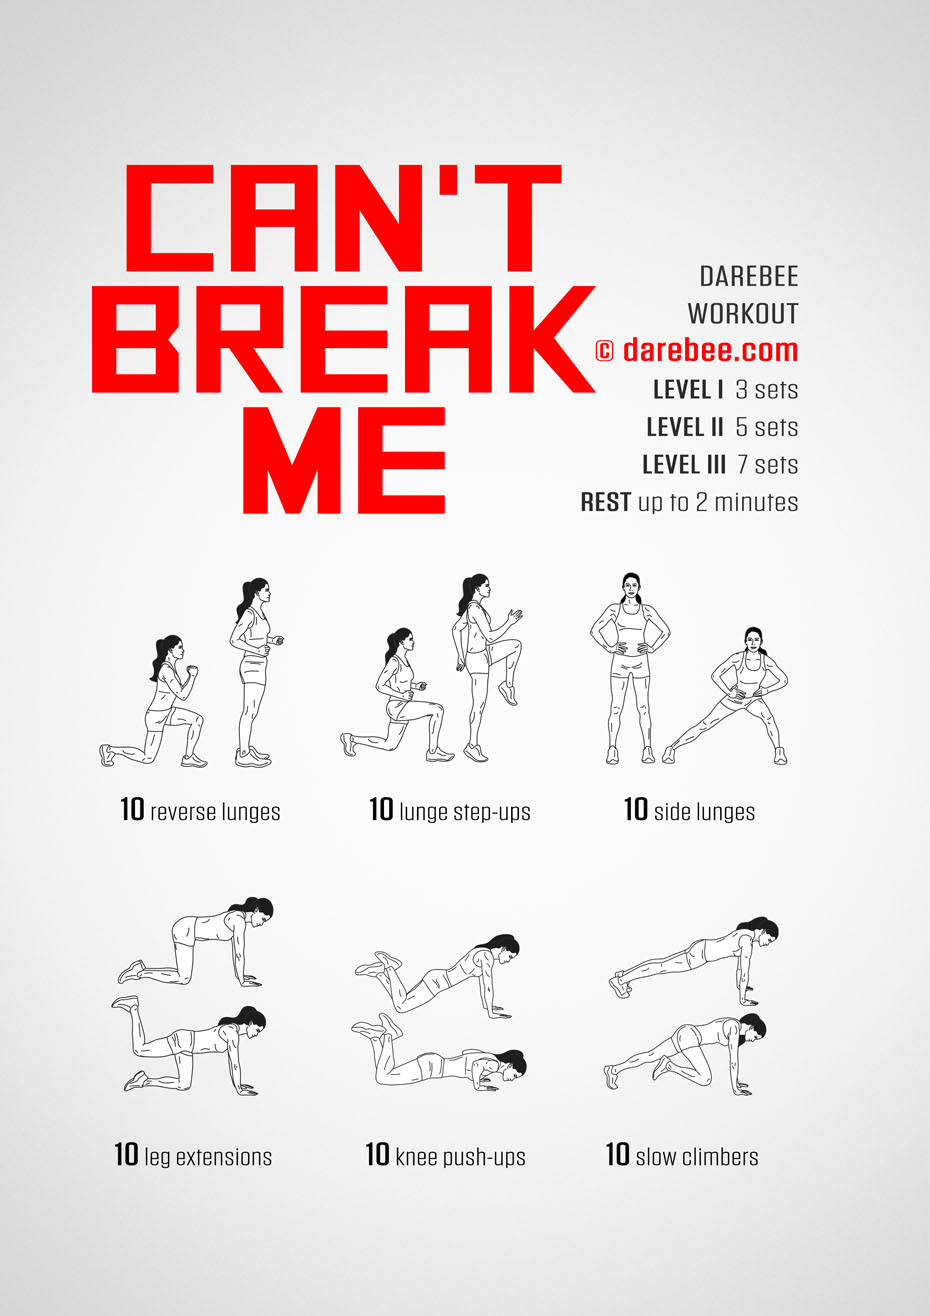 Can't Break Me Darebee no-equipment home fitness workout